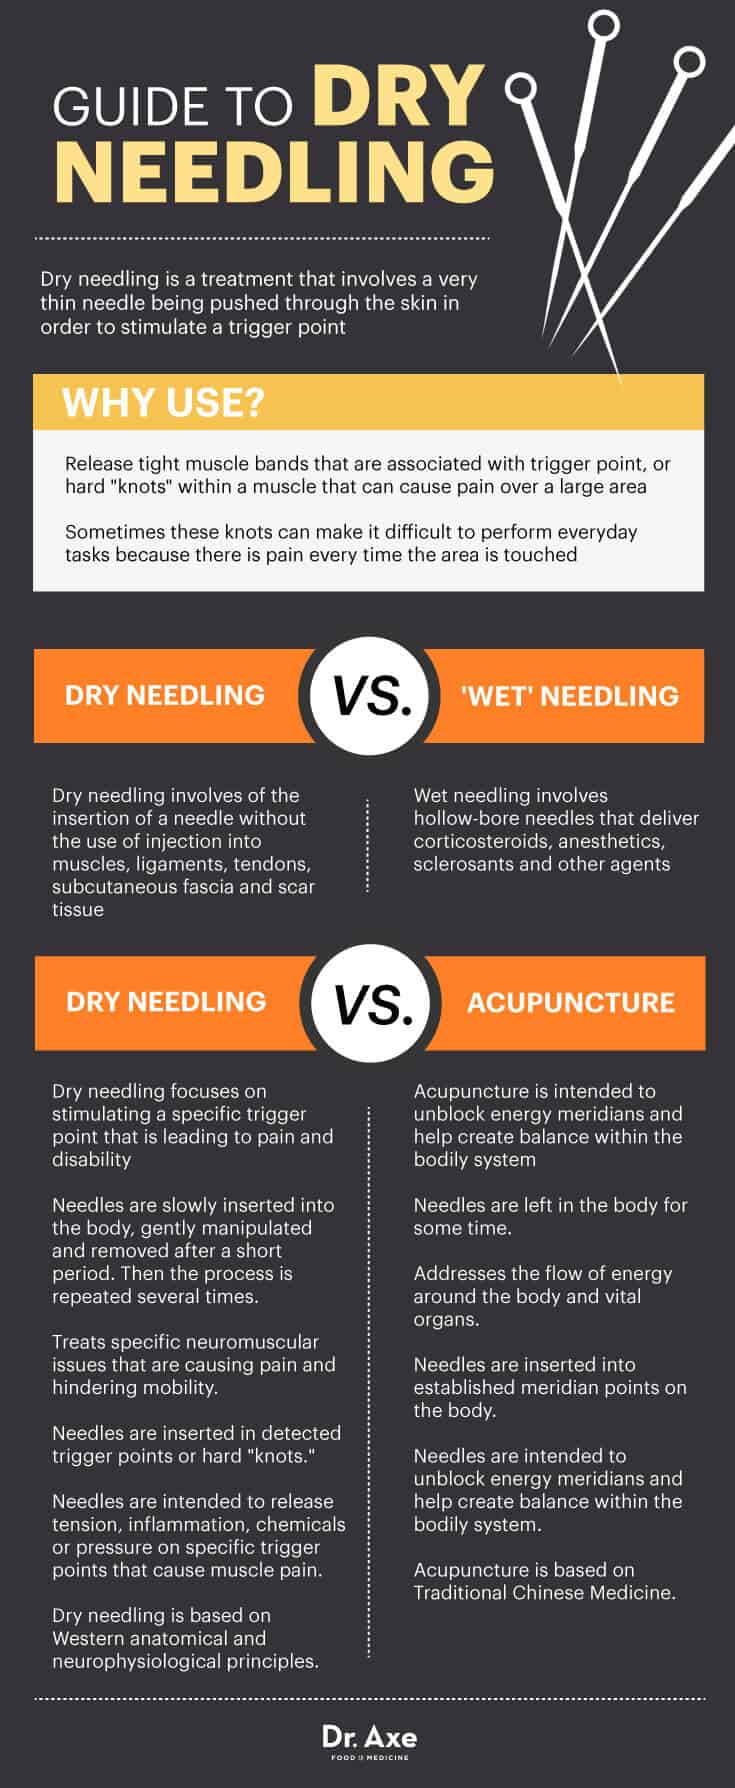 Guide to Dry Needling